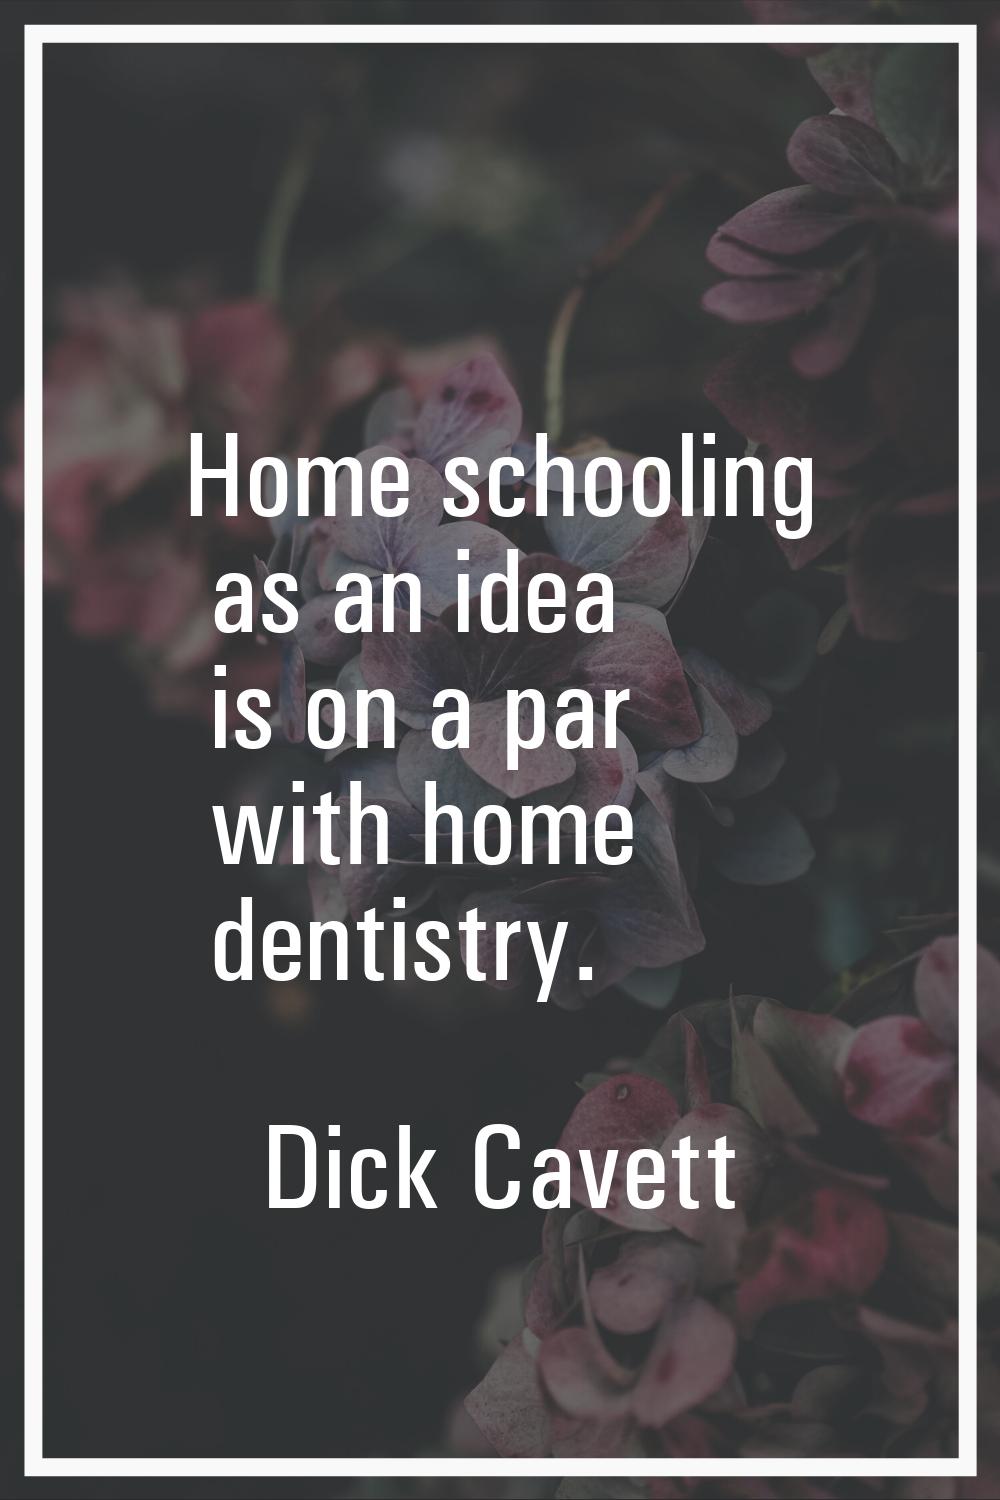 Home schooling as an idea is on a par with home dentistry.